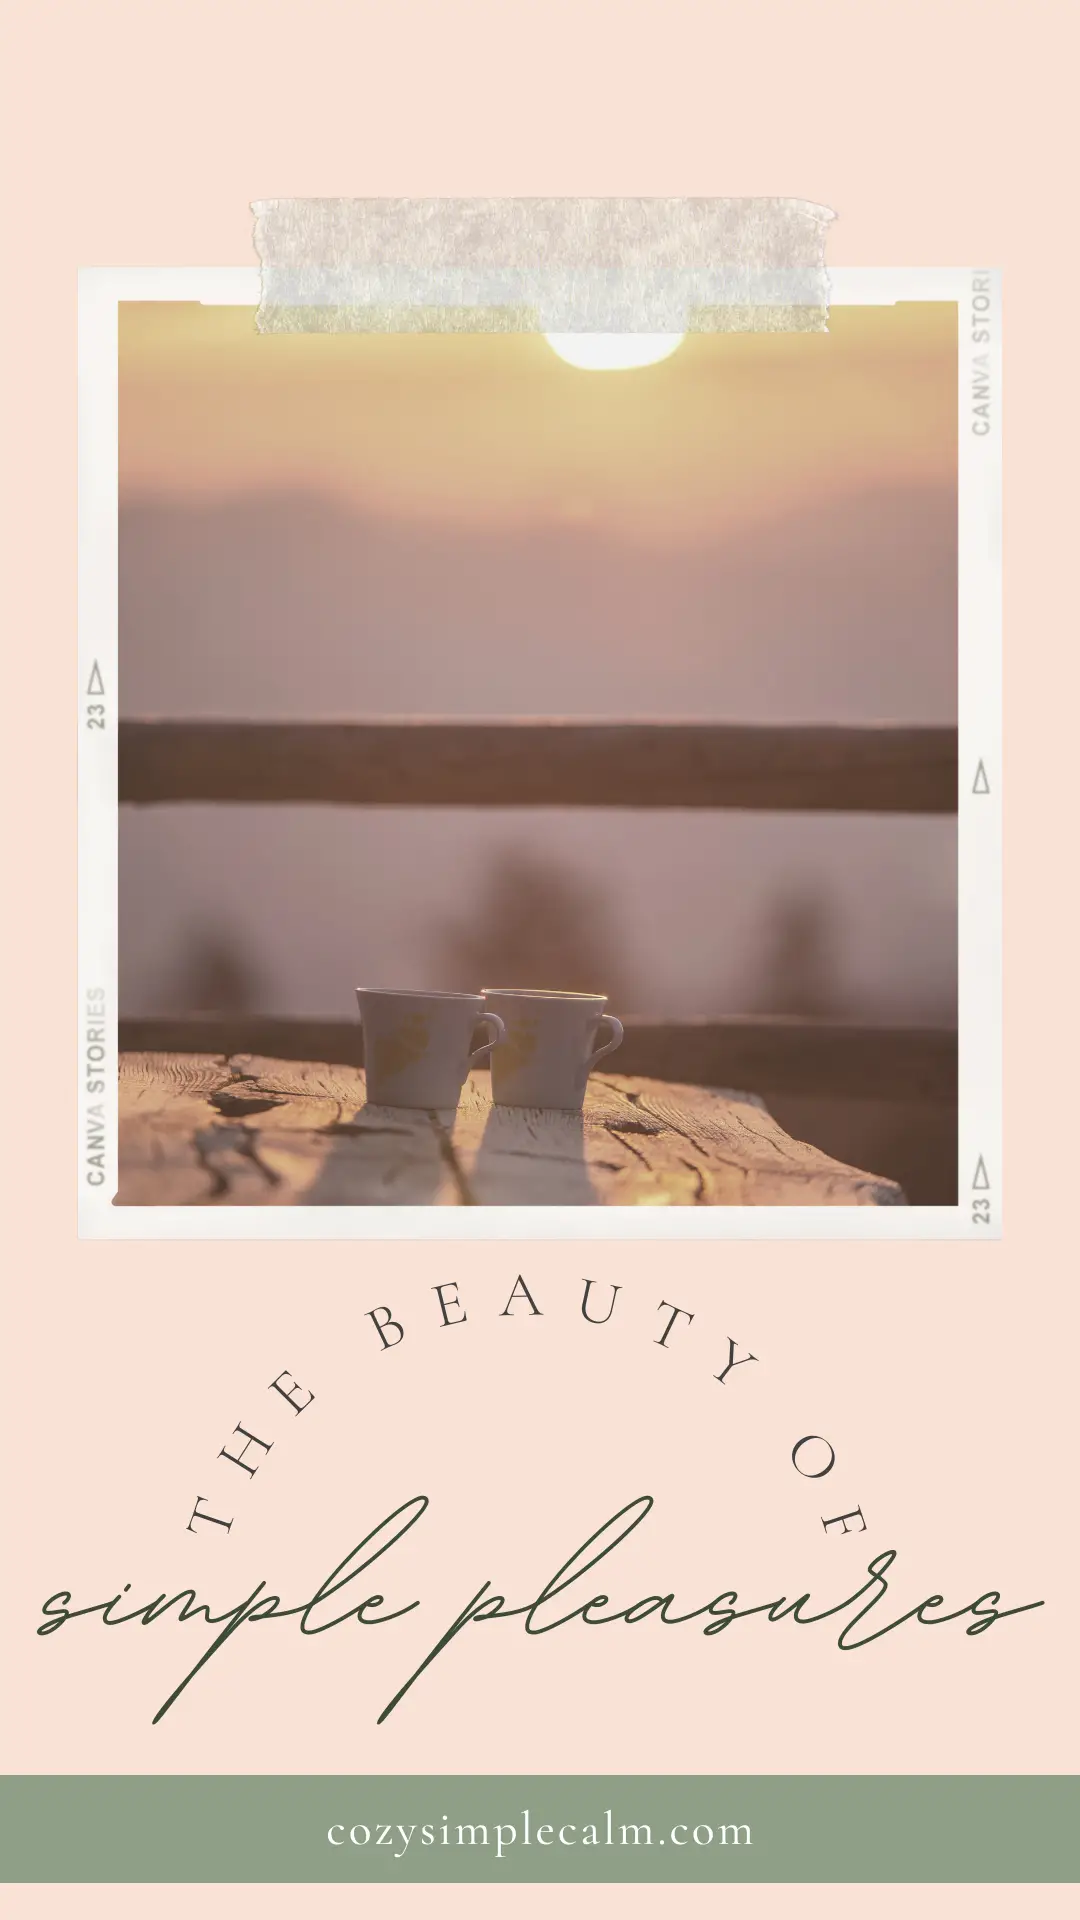 Image of two mugs sitting on outdoor table at sunset - text overlay: The beauty of simple pleasures